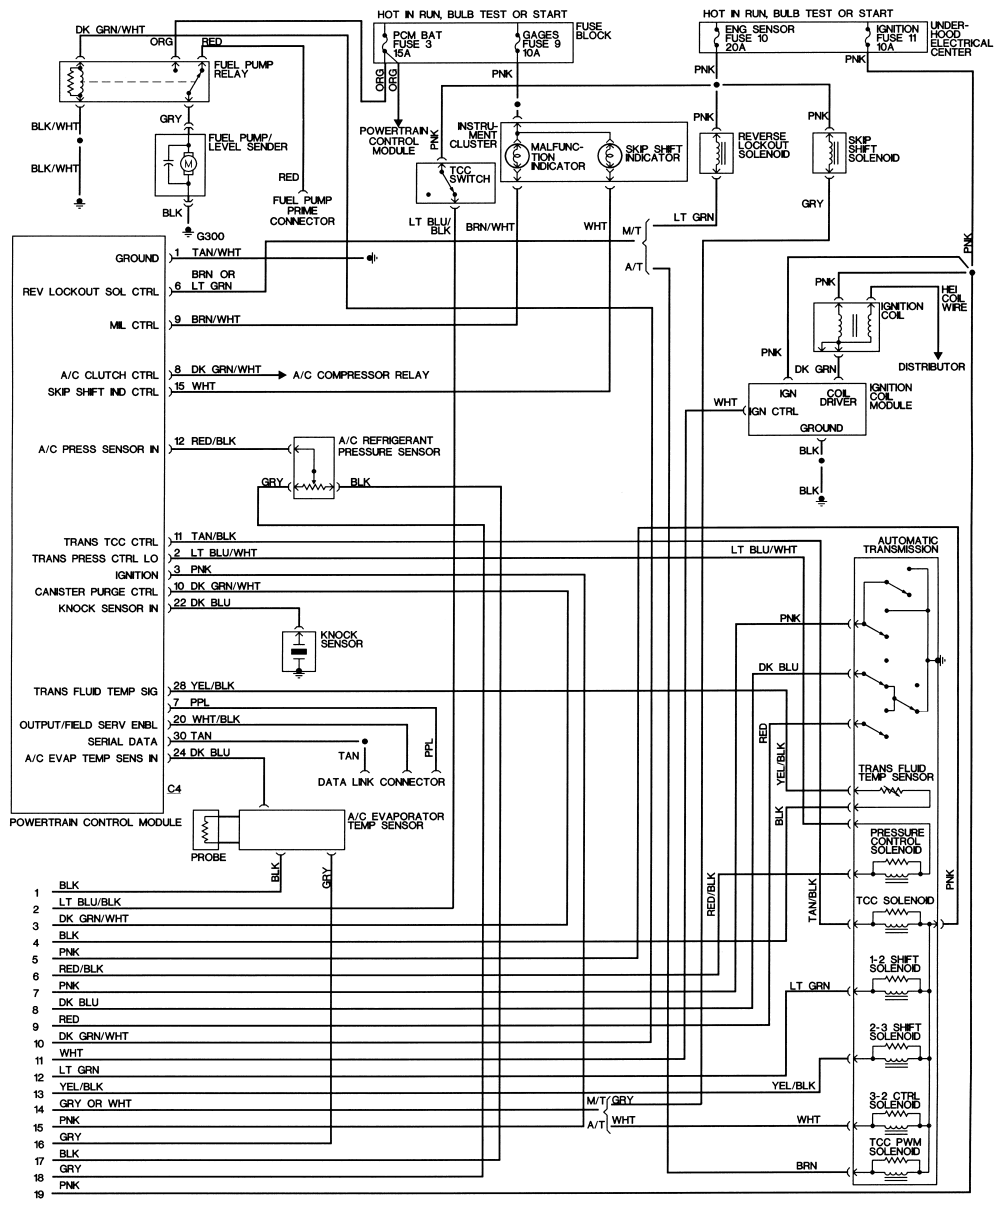 [DIAGRAM] For A 98 Explorer Wiring Diagram FULL Version HD Quality